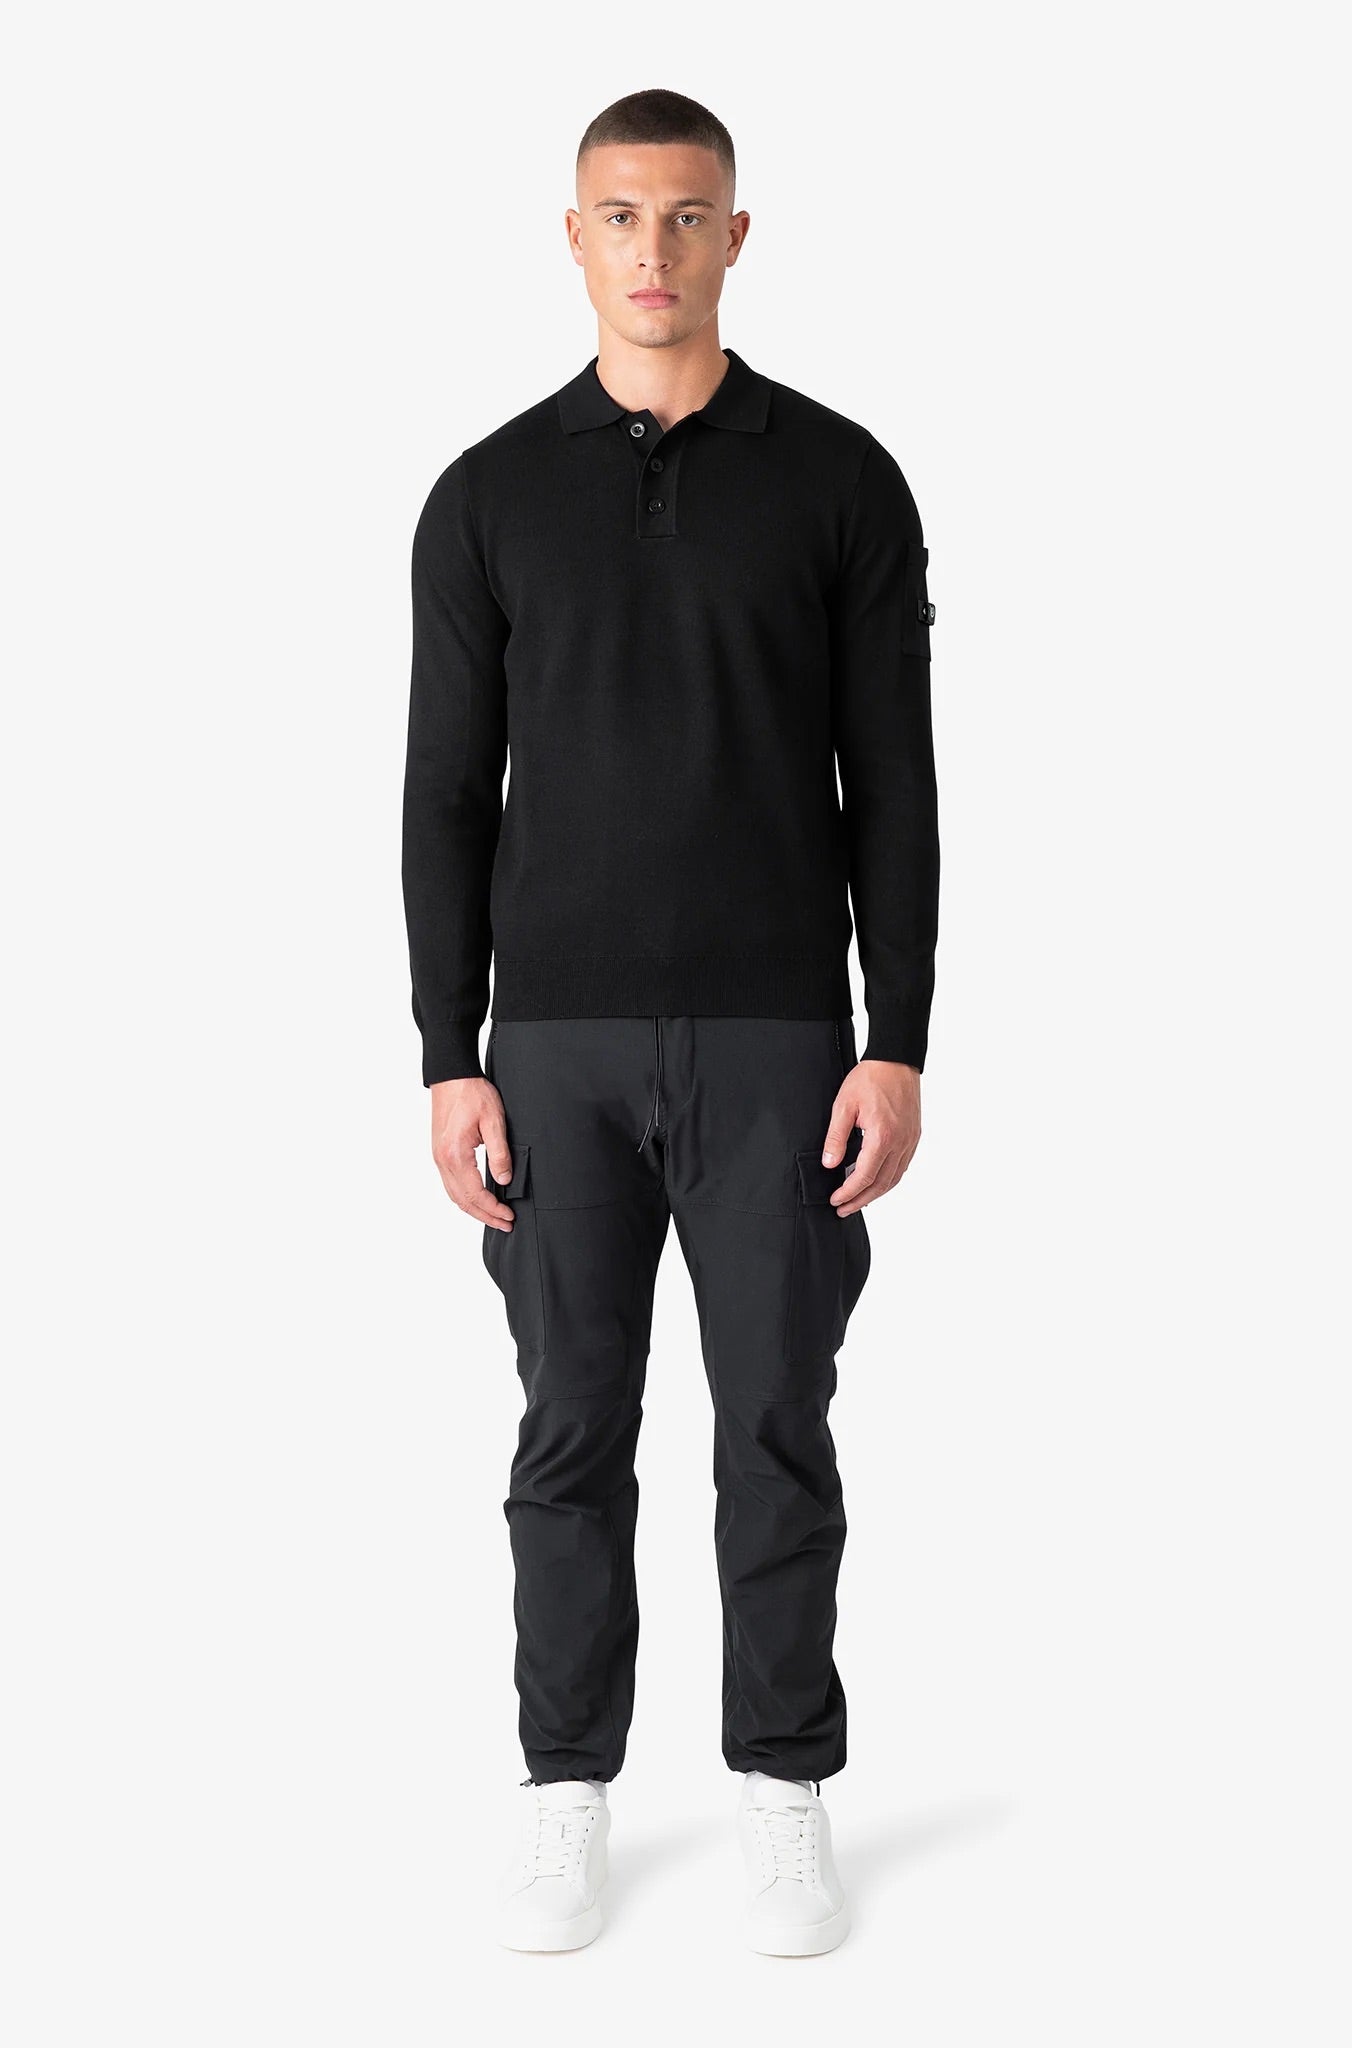 QUOTRELL COUTURE | Seattle Cargo Pants - Black